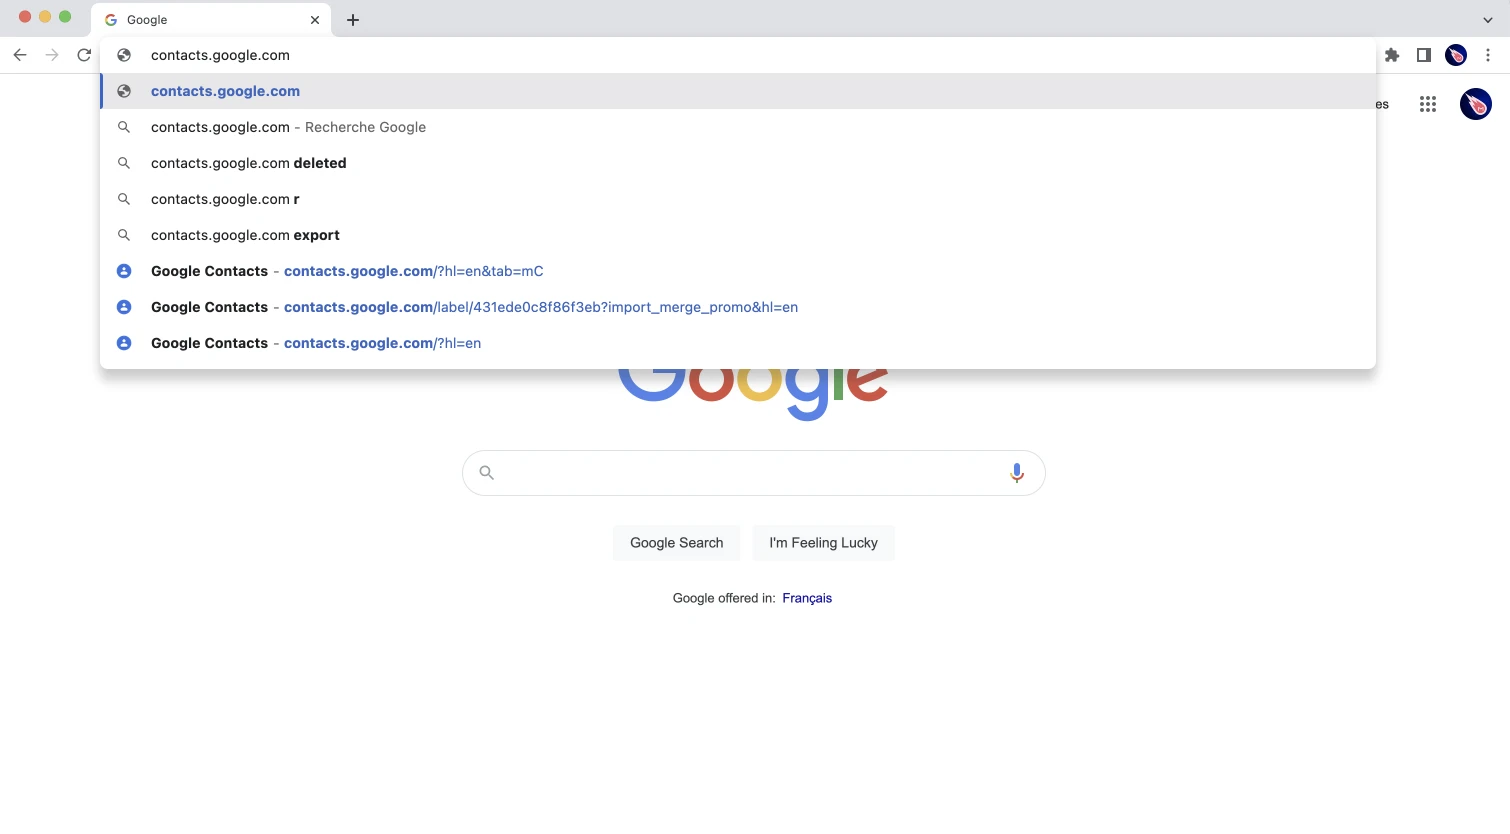 Google Chrome searching for contacts.google.com in omnibar